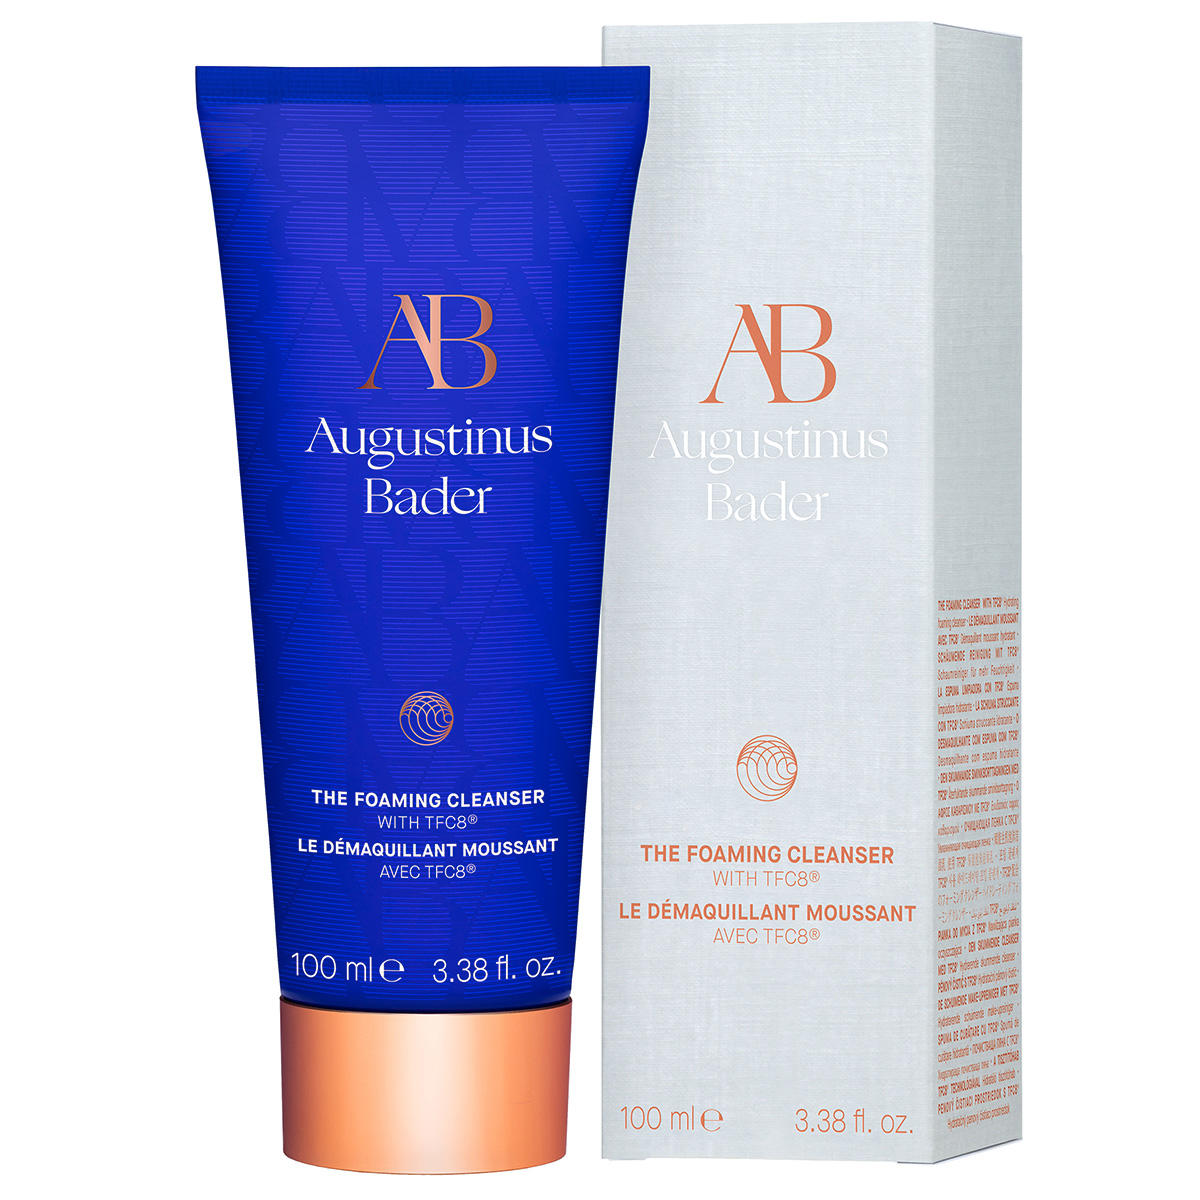 Augustinus Bader The Foaming Cleanser 100 ml - 2